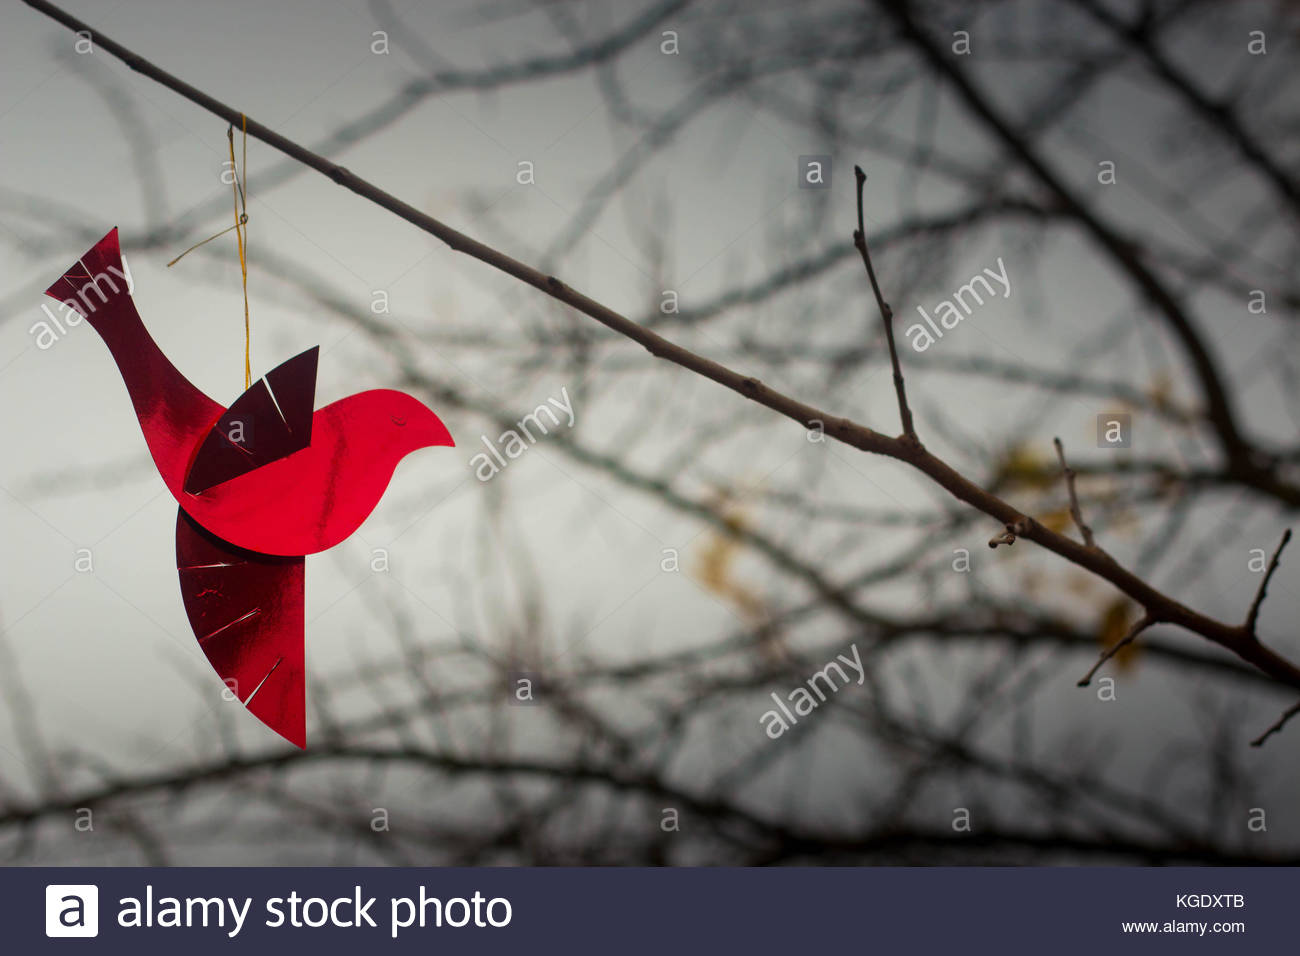 Shiny Red Bird Ornament On A Branch With Cold Winter Sky In The